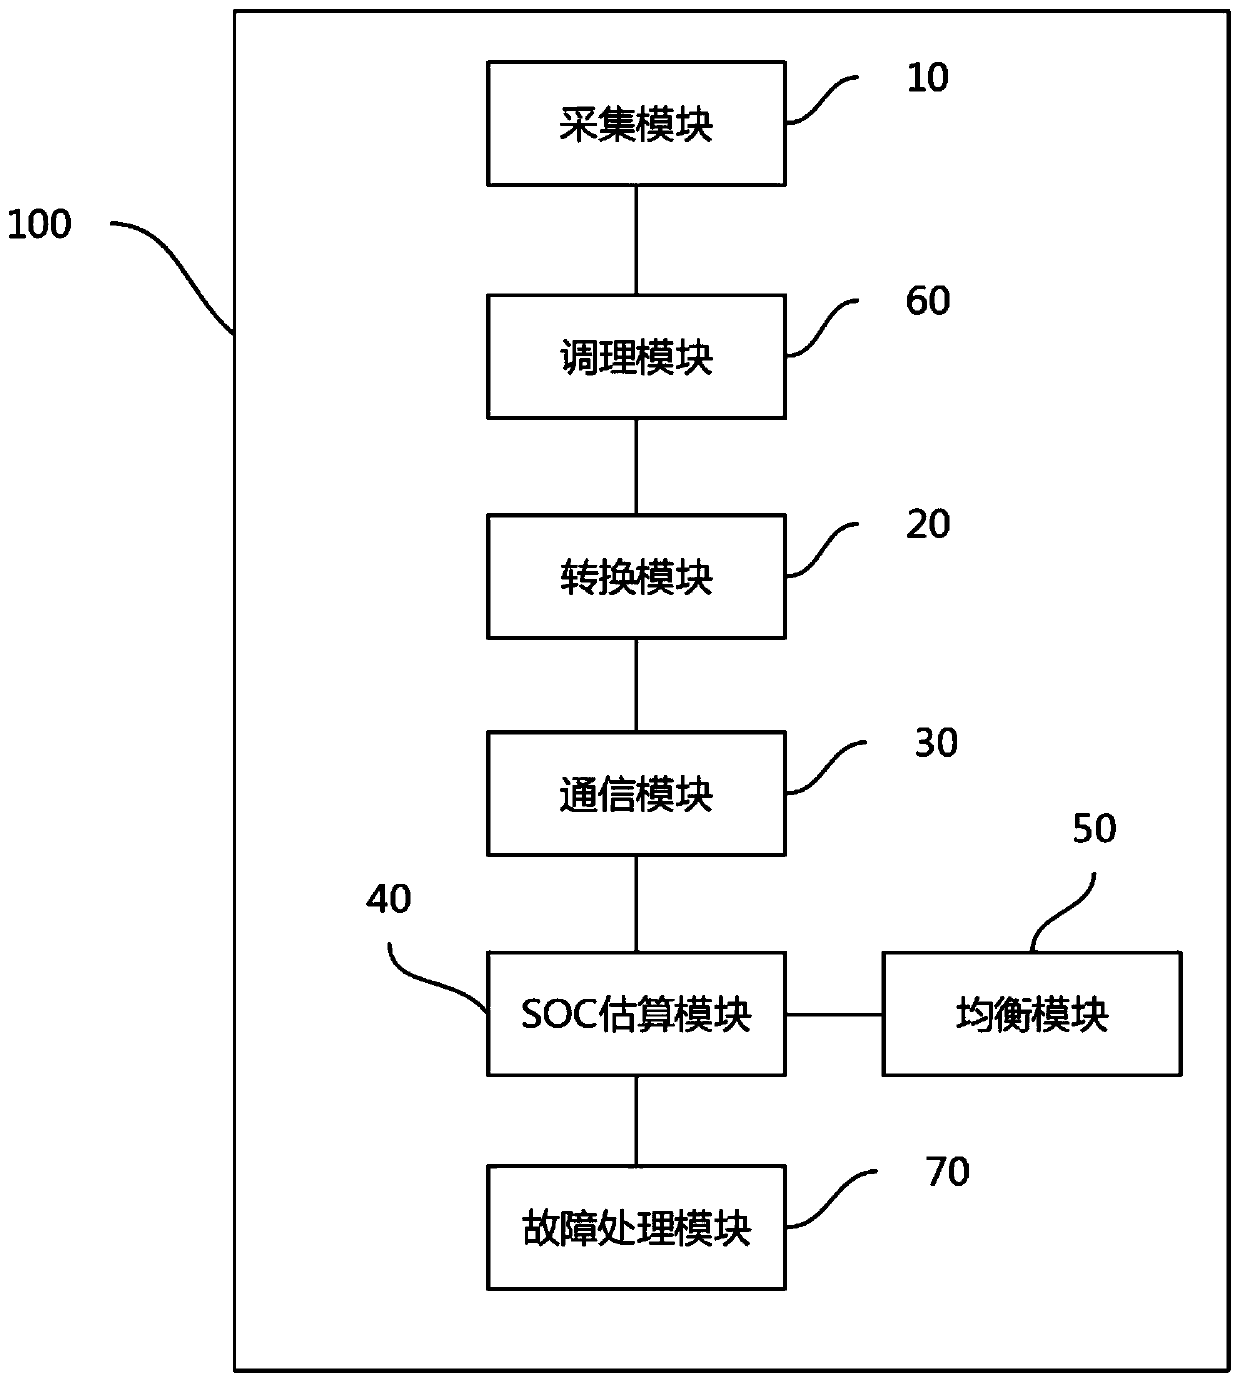 SOC estimation and balance control system and method for electric vehicle battery management system